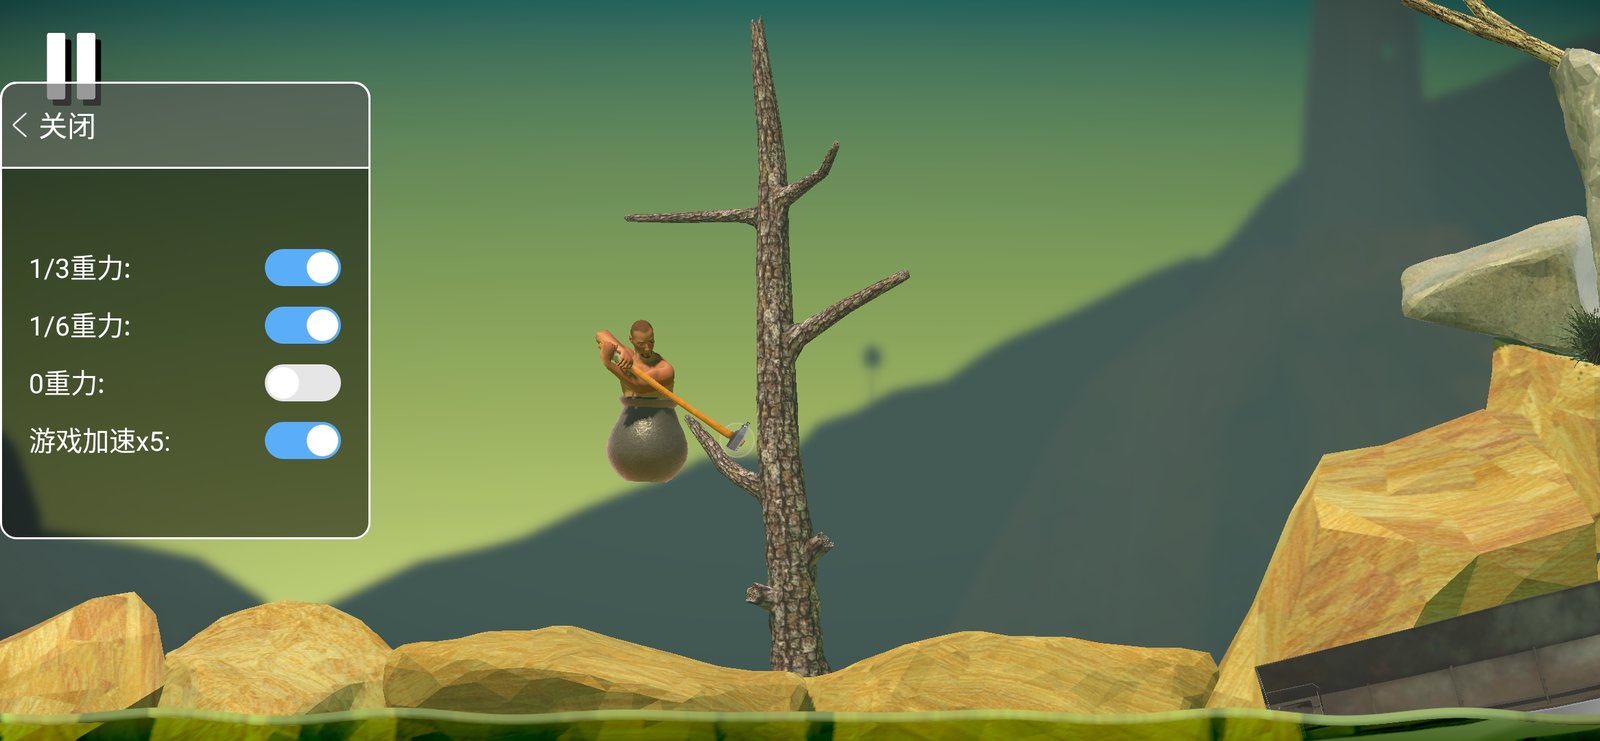 Getting Over It with Bennett Foddy MOD APK Free Download - Techno Brotherzz